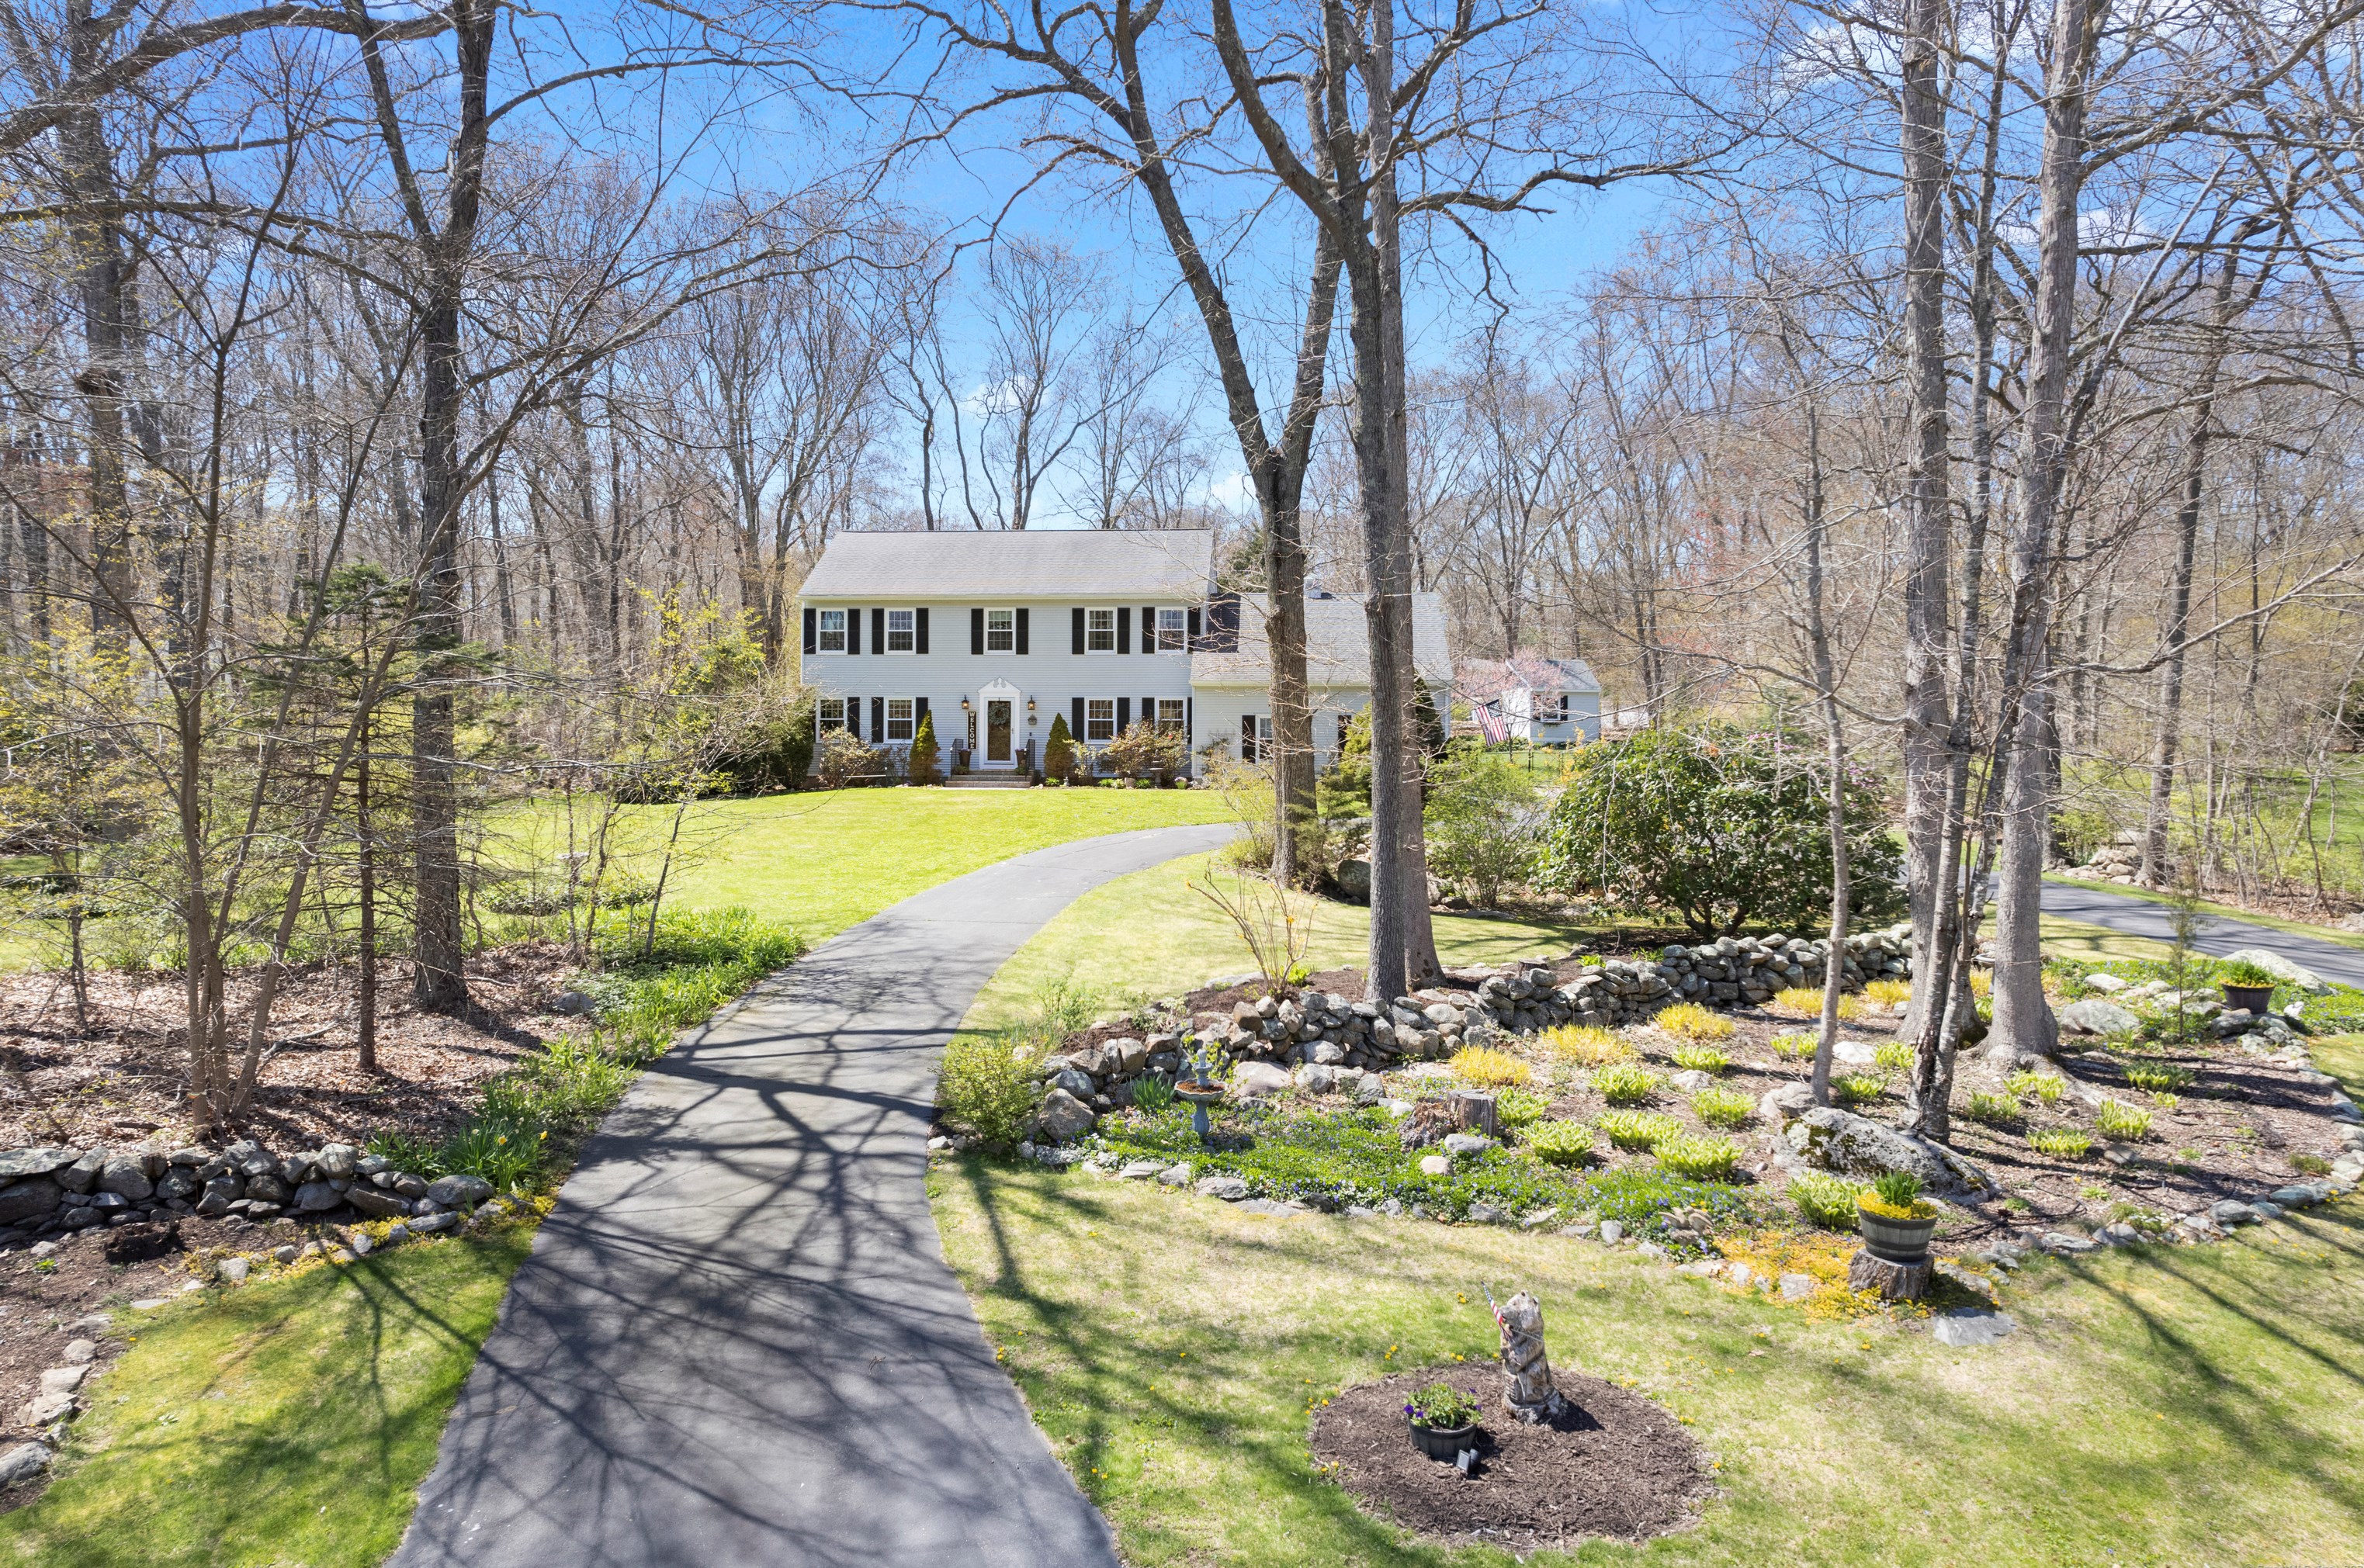 26 Chriswood Trce, Gales Ferry, CT 06339 exterior